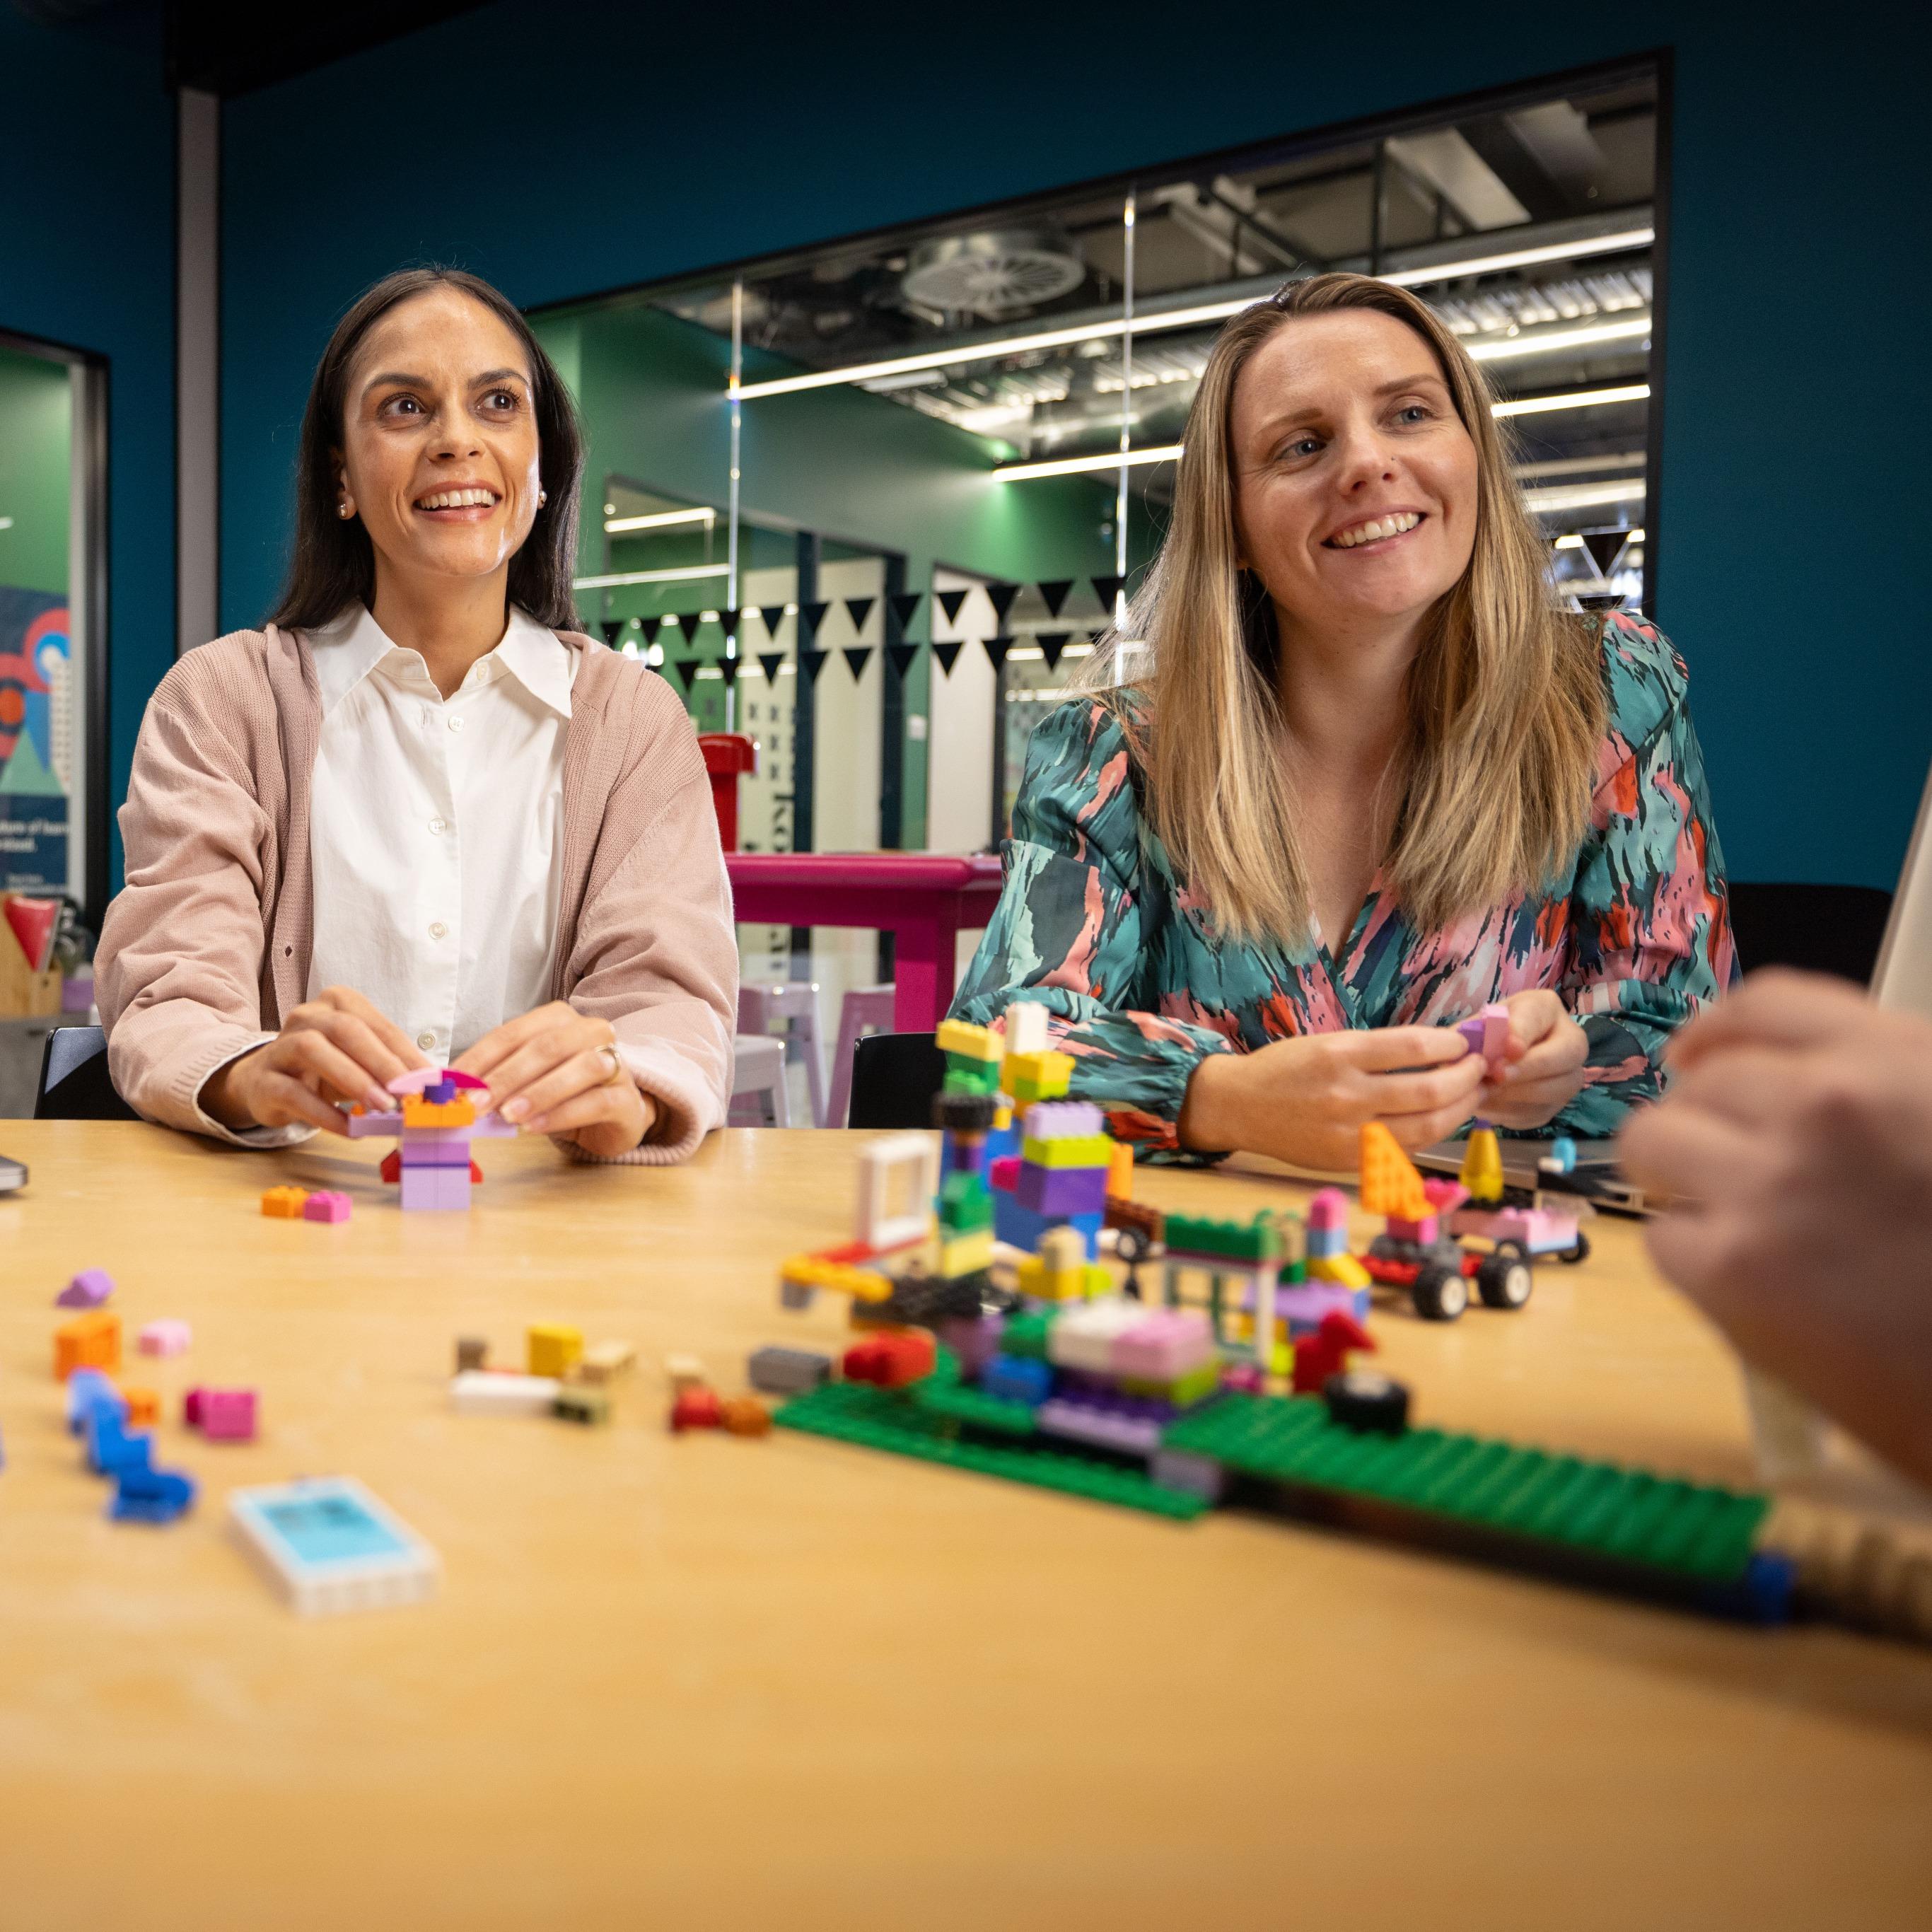 Two women smiling and building with LEGO bricks in a modern office with glass walls and vibrant decor. Collaborative and cheerful.